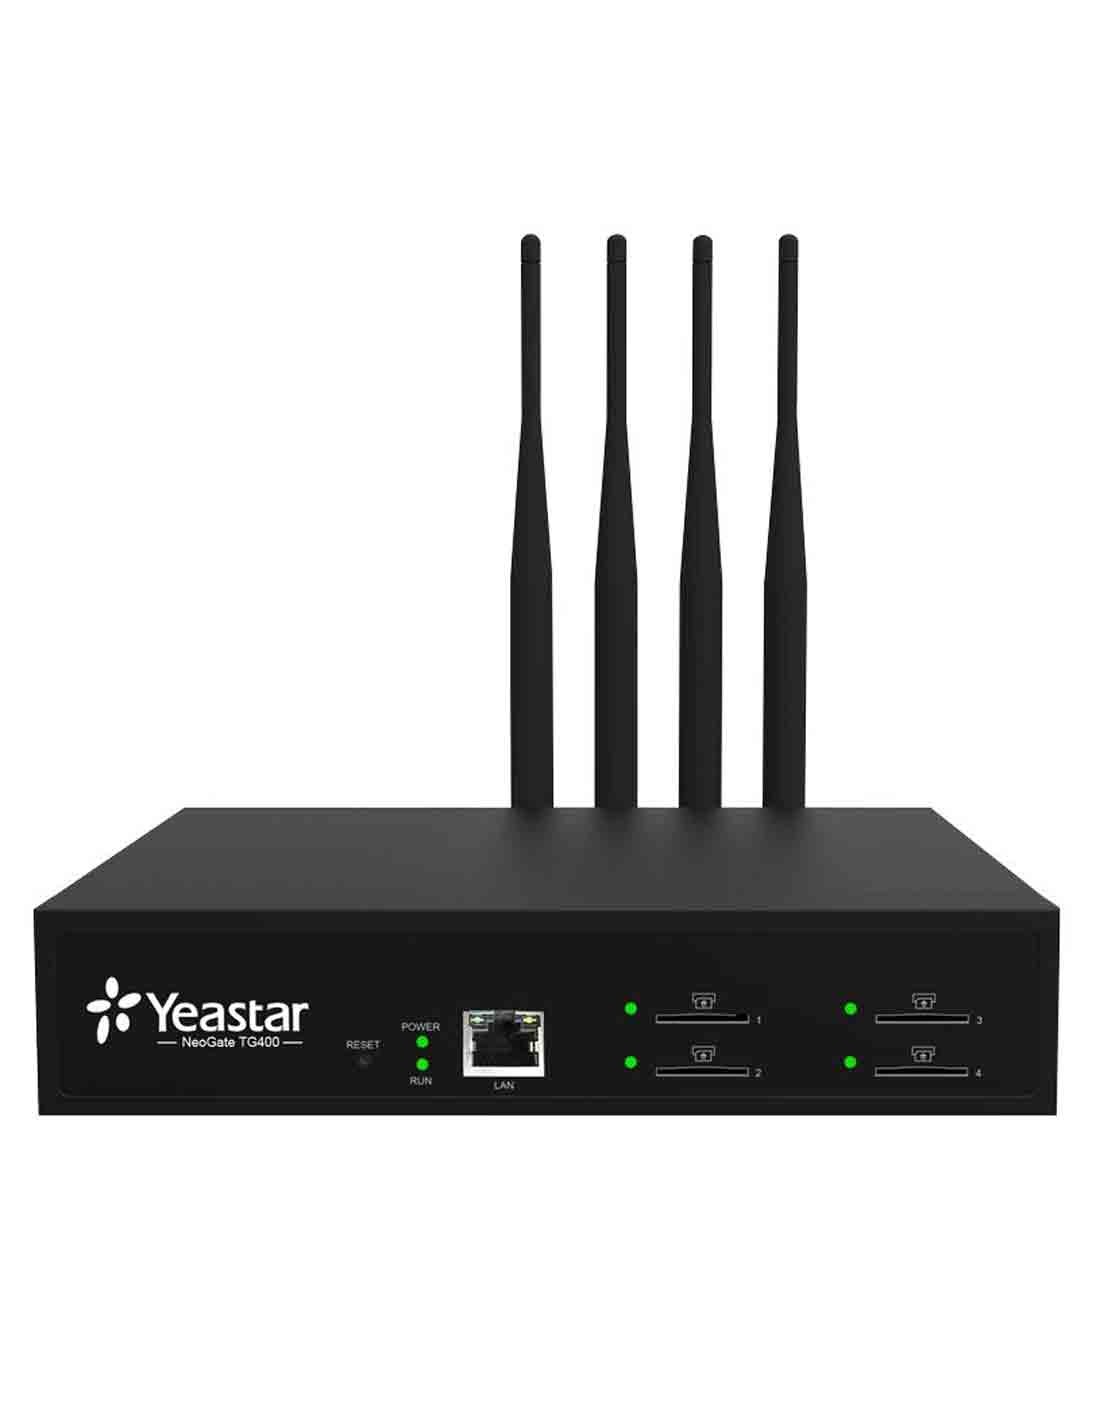 Yeastar Neogate TG400 GSM Gateway is a compact 4 channels VoIP GSM/CDMA/UMTS gateway